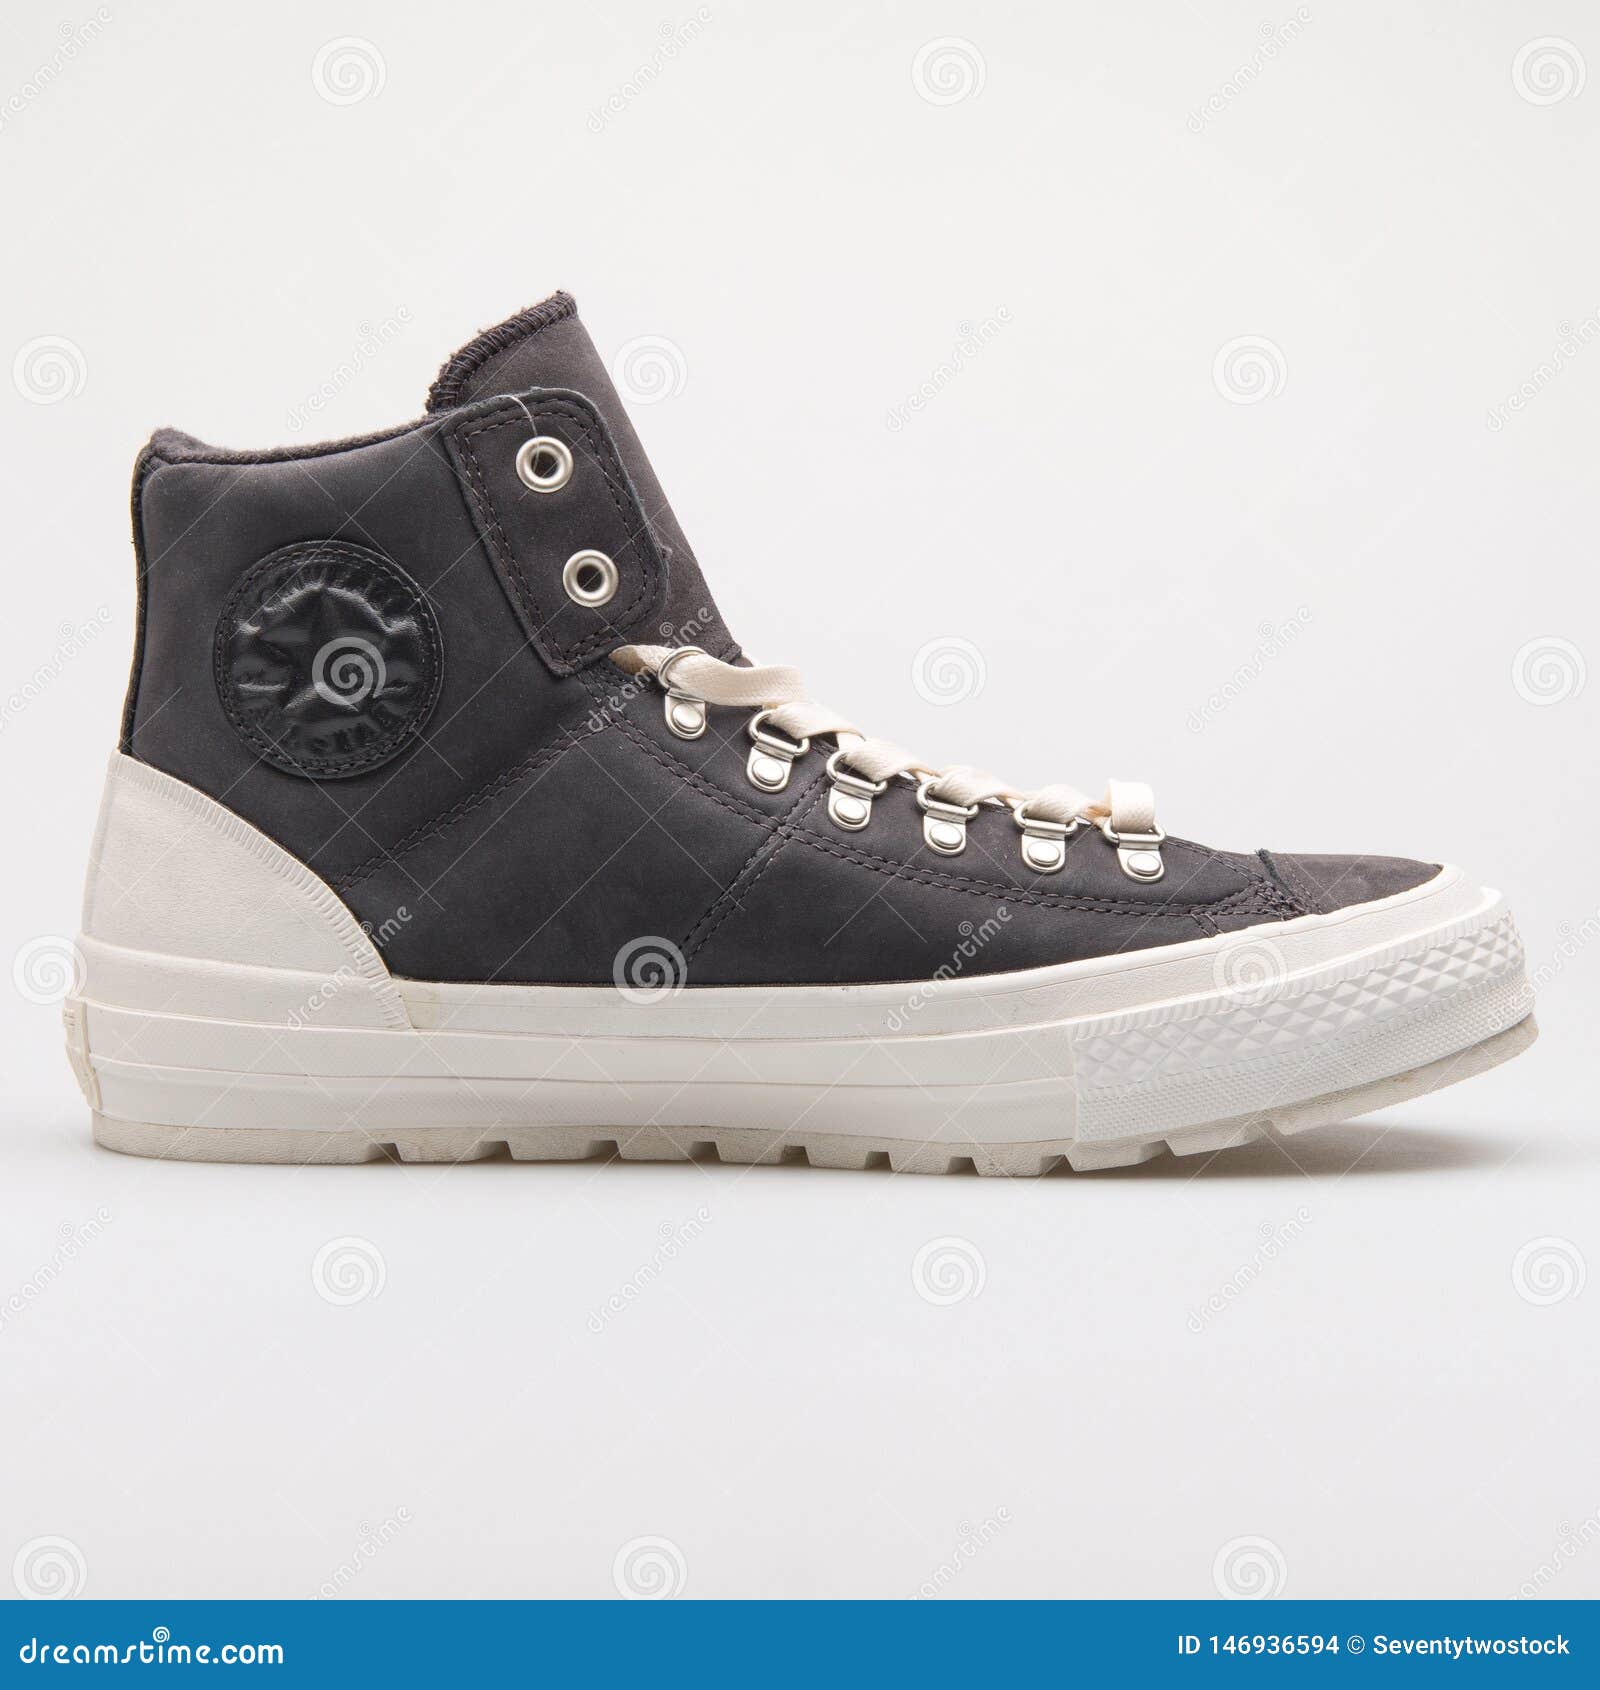 converse all star street sneakers